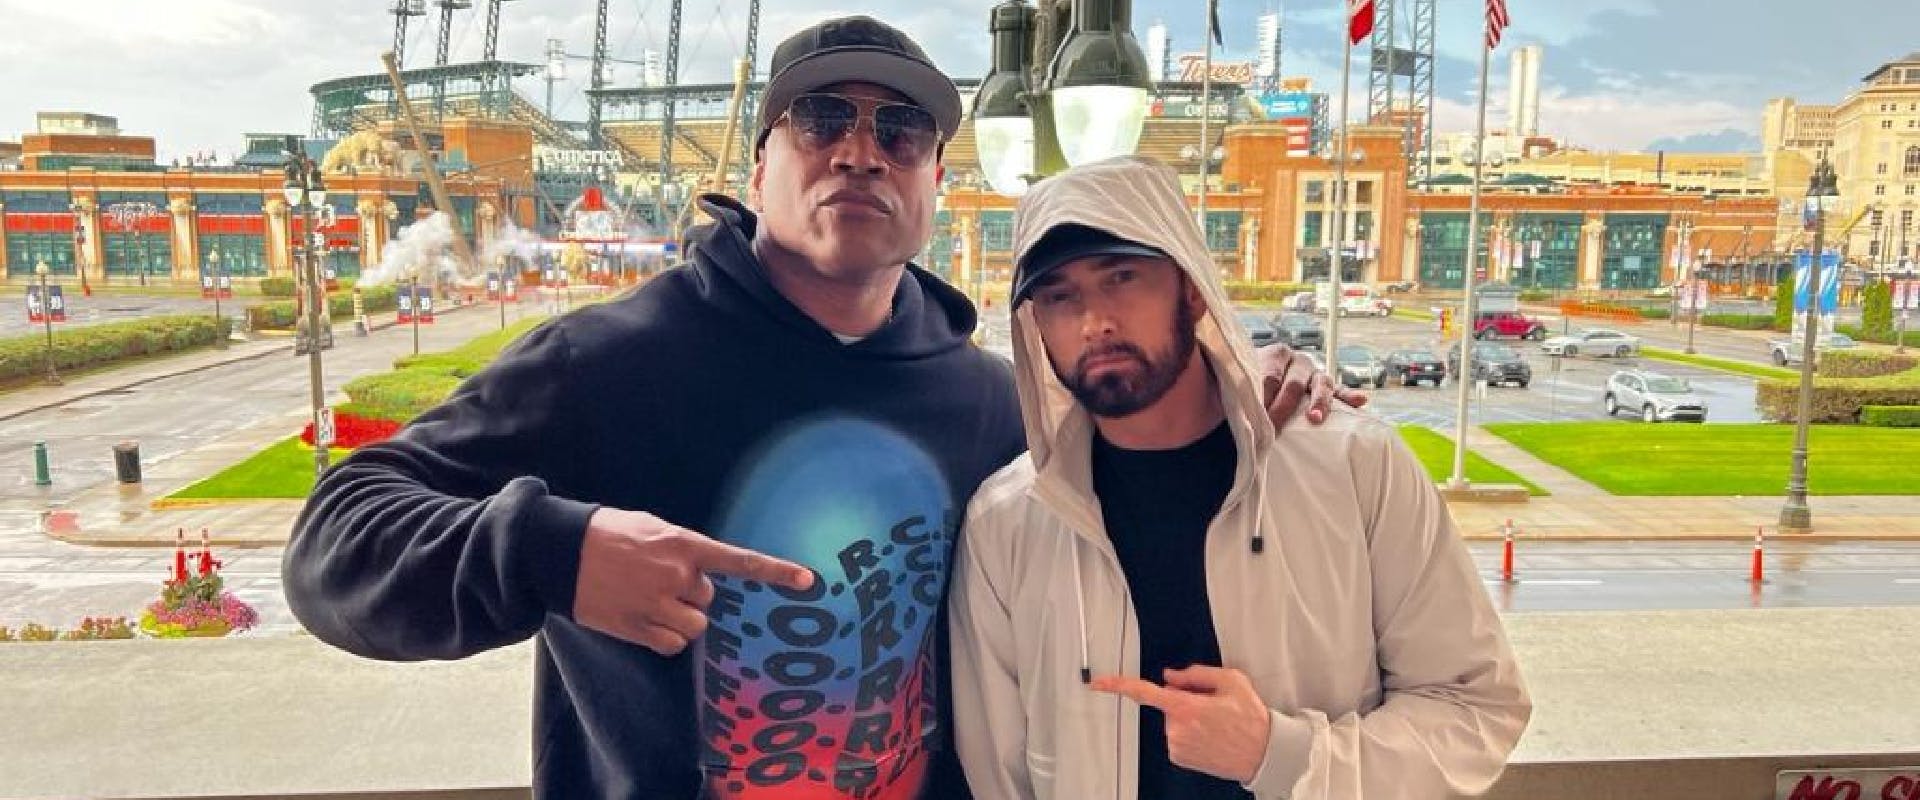 LL COOL J and Eminem Link Up Ahead of Detroit F.O.R.C.E. Tour Stop